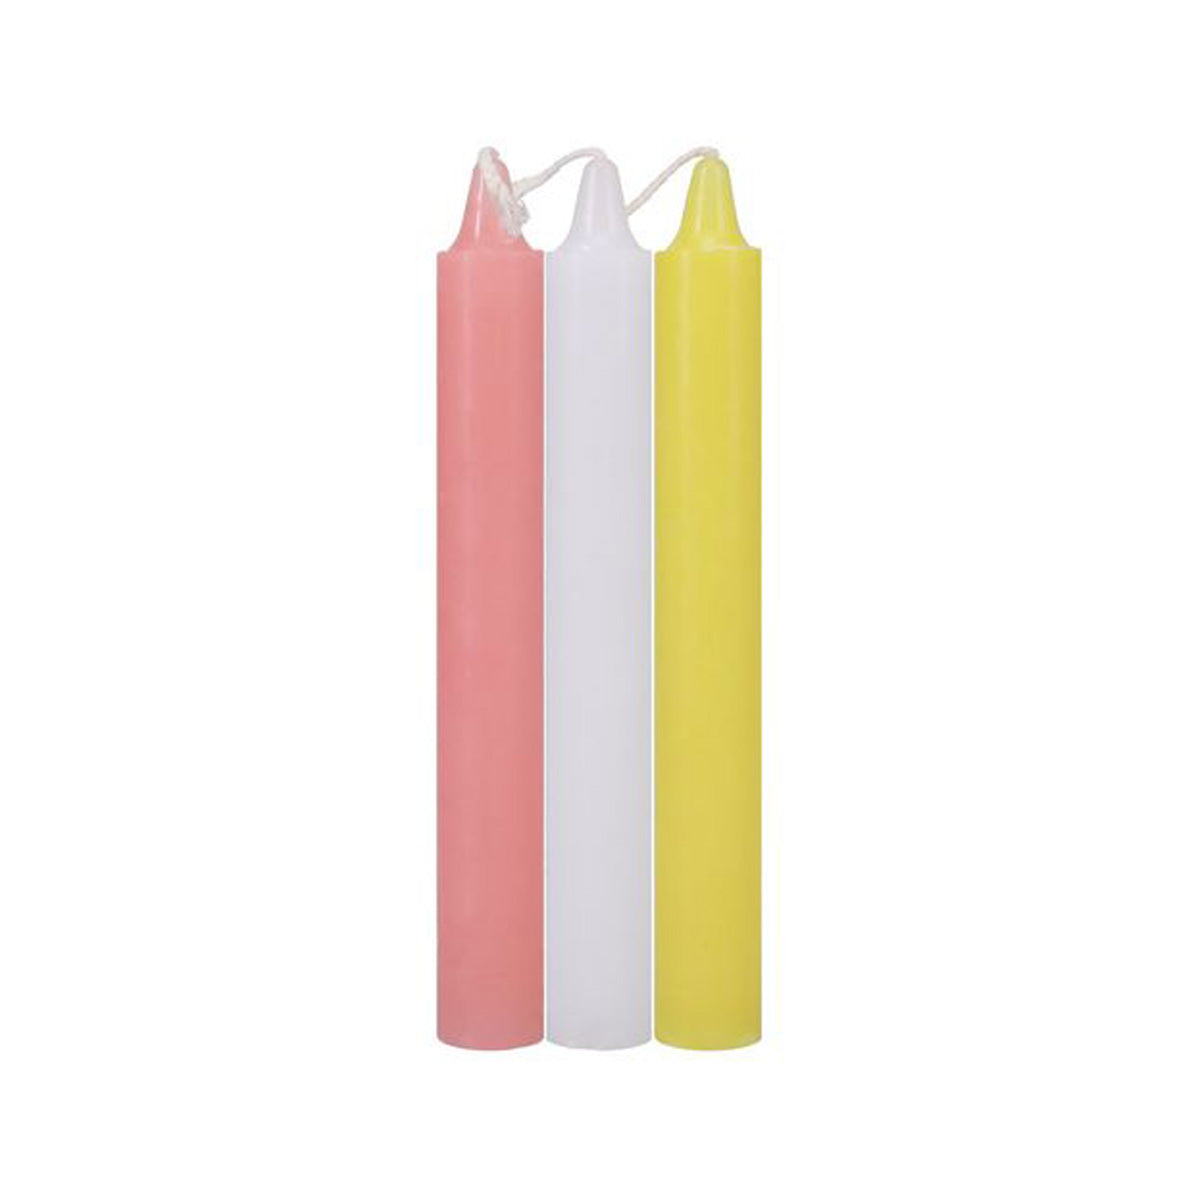 Pack of three pink, yellow and white candles for wax BSDM play Nudie Co